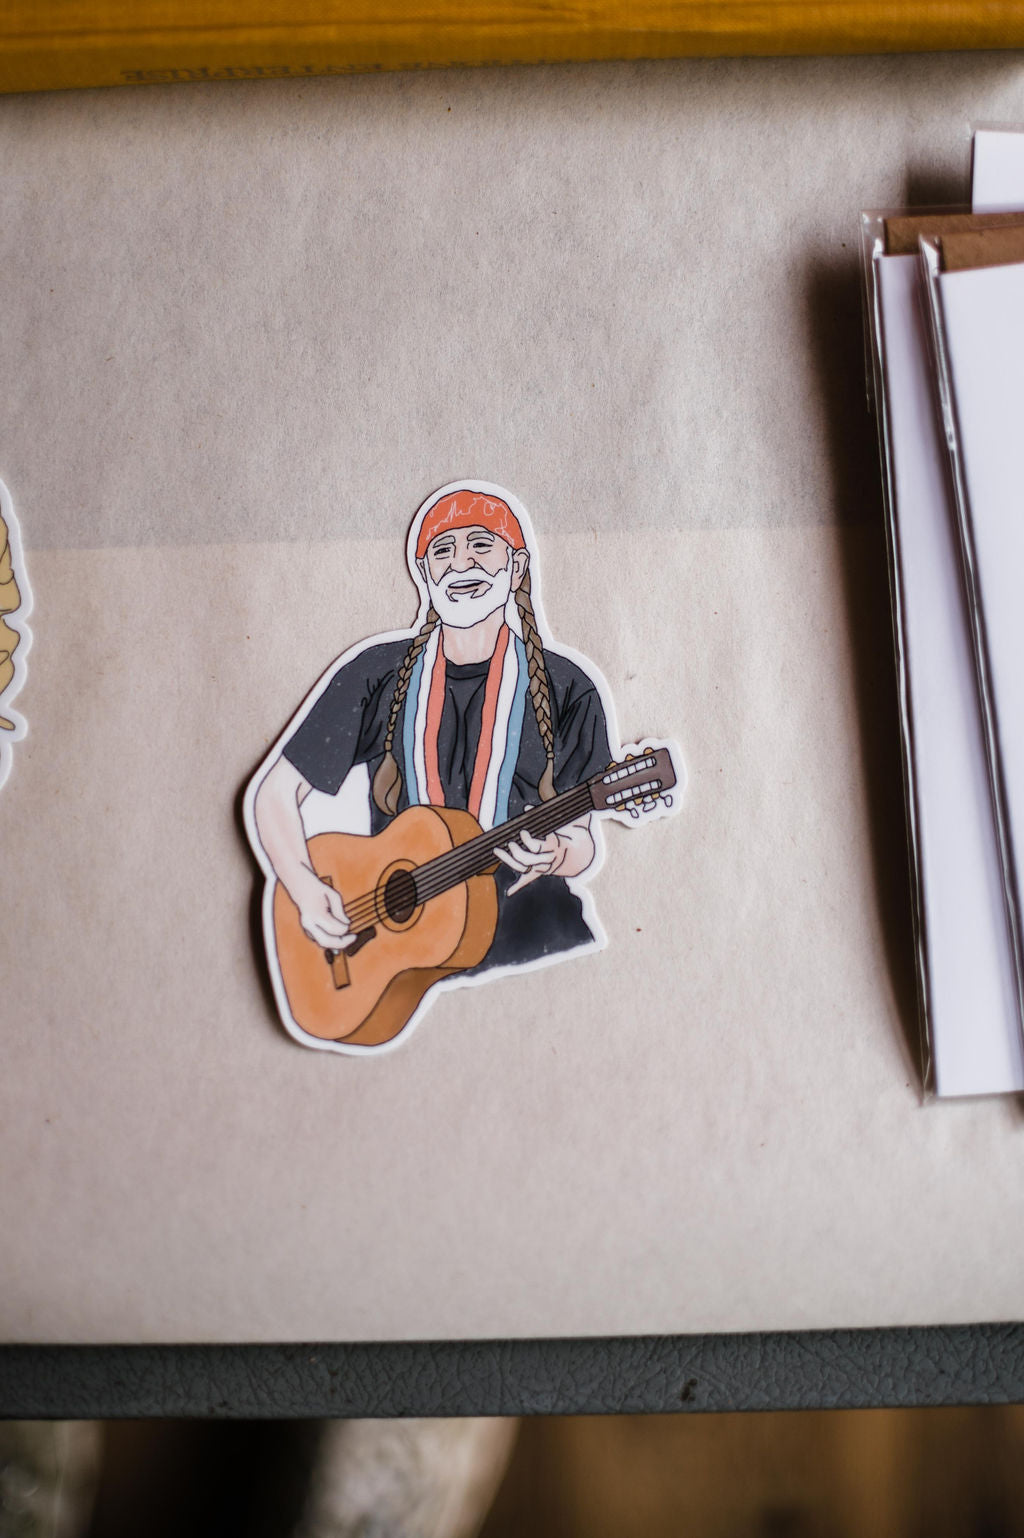 High quality, matte vinyl stickers \\ waterproof, size: 3" x 3.5". A great gift for someone who loves Willie! This could go on a guitar, a car, a favorite notebook, or a water bottle.Ramble & Co. is a family owned business. Shop at shop.rambleandcompany.com or visit our store in Wichita Falls, Texas || small batch/ hand printed tees + fine art prints | your source of encouragement + inspiration.